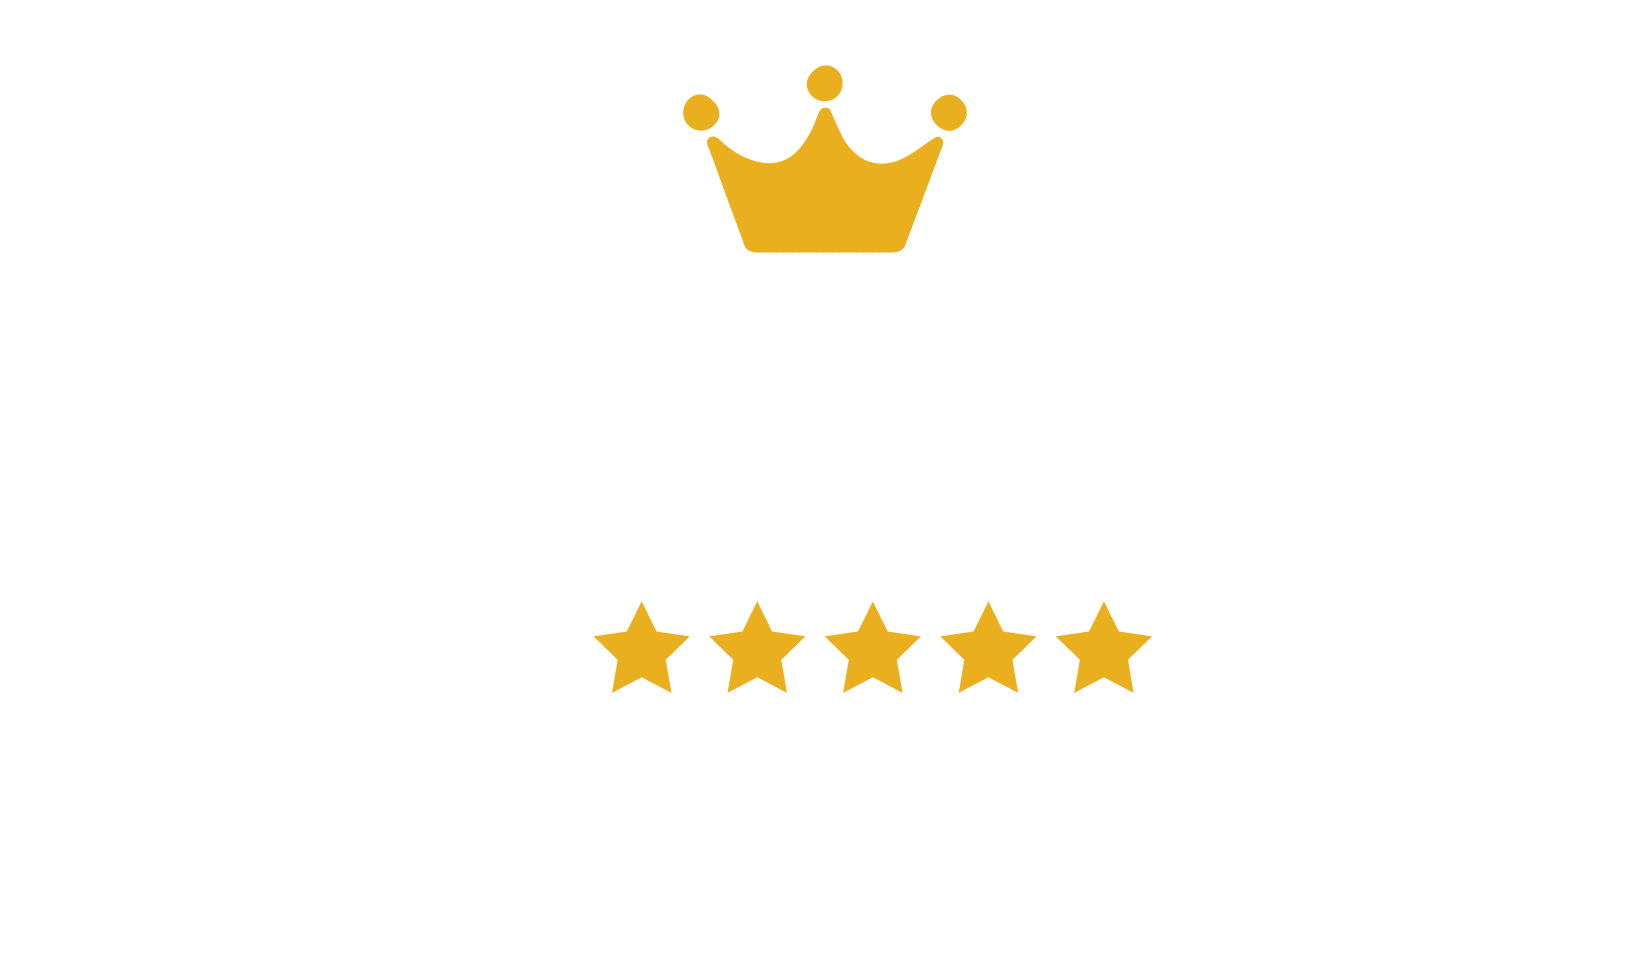 A captivating five star logo with a crown in the middle, perfect for web design or web development companies based in Toronto.